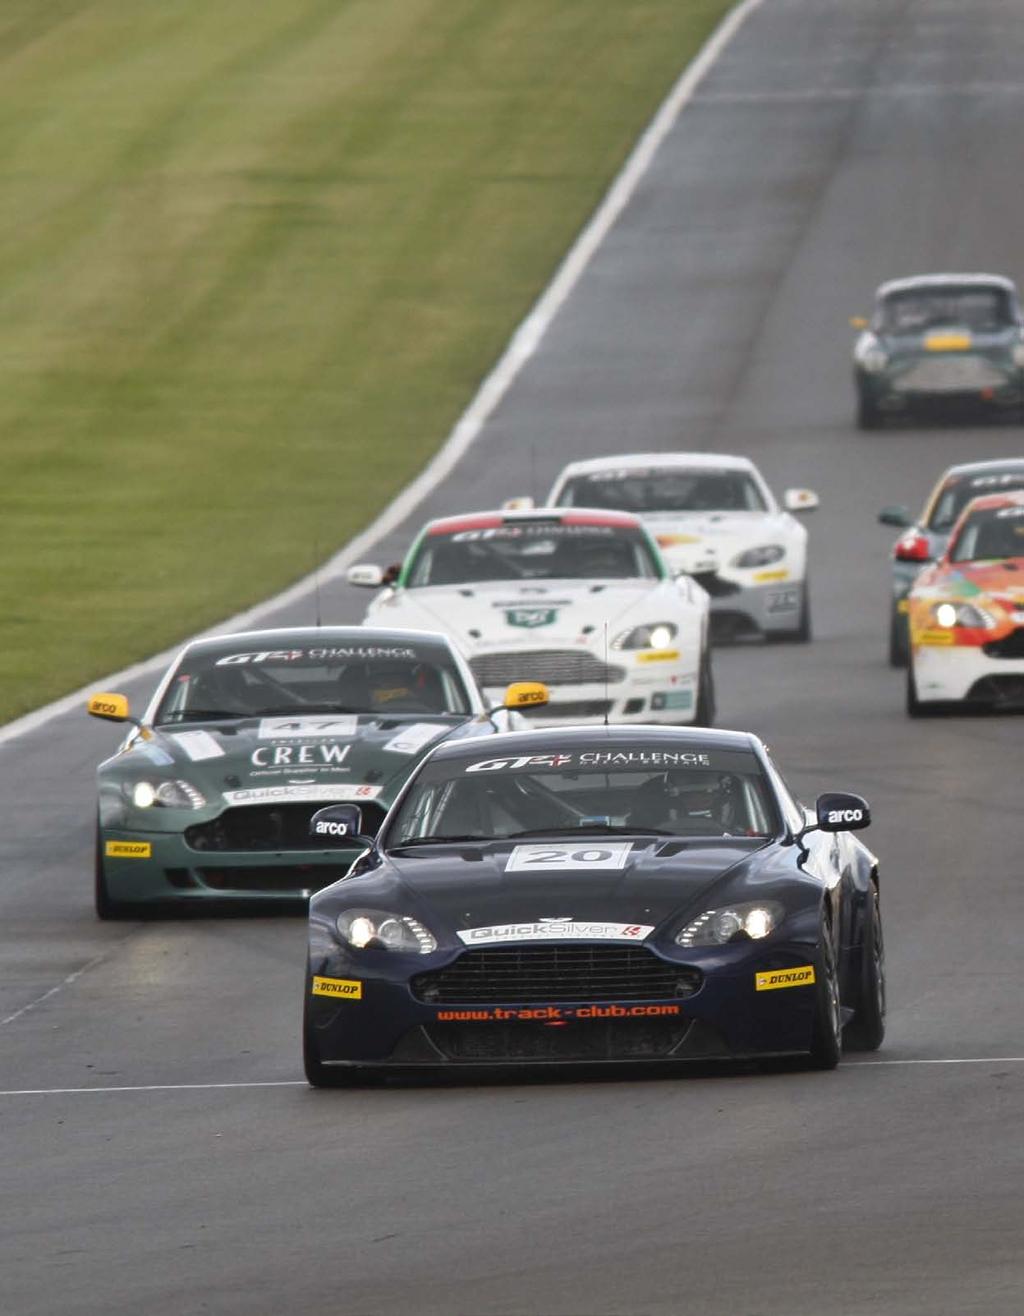 ASTON MARTIN GT4 CHALLENGE OF GREAT BRITAIN The Aston Martin GT4 Challenge of Great Britain enters its fourth season in 2013.